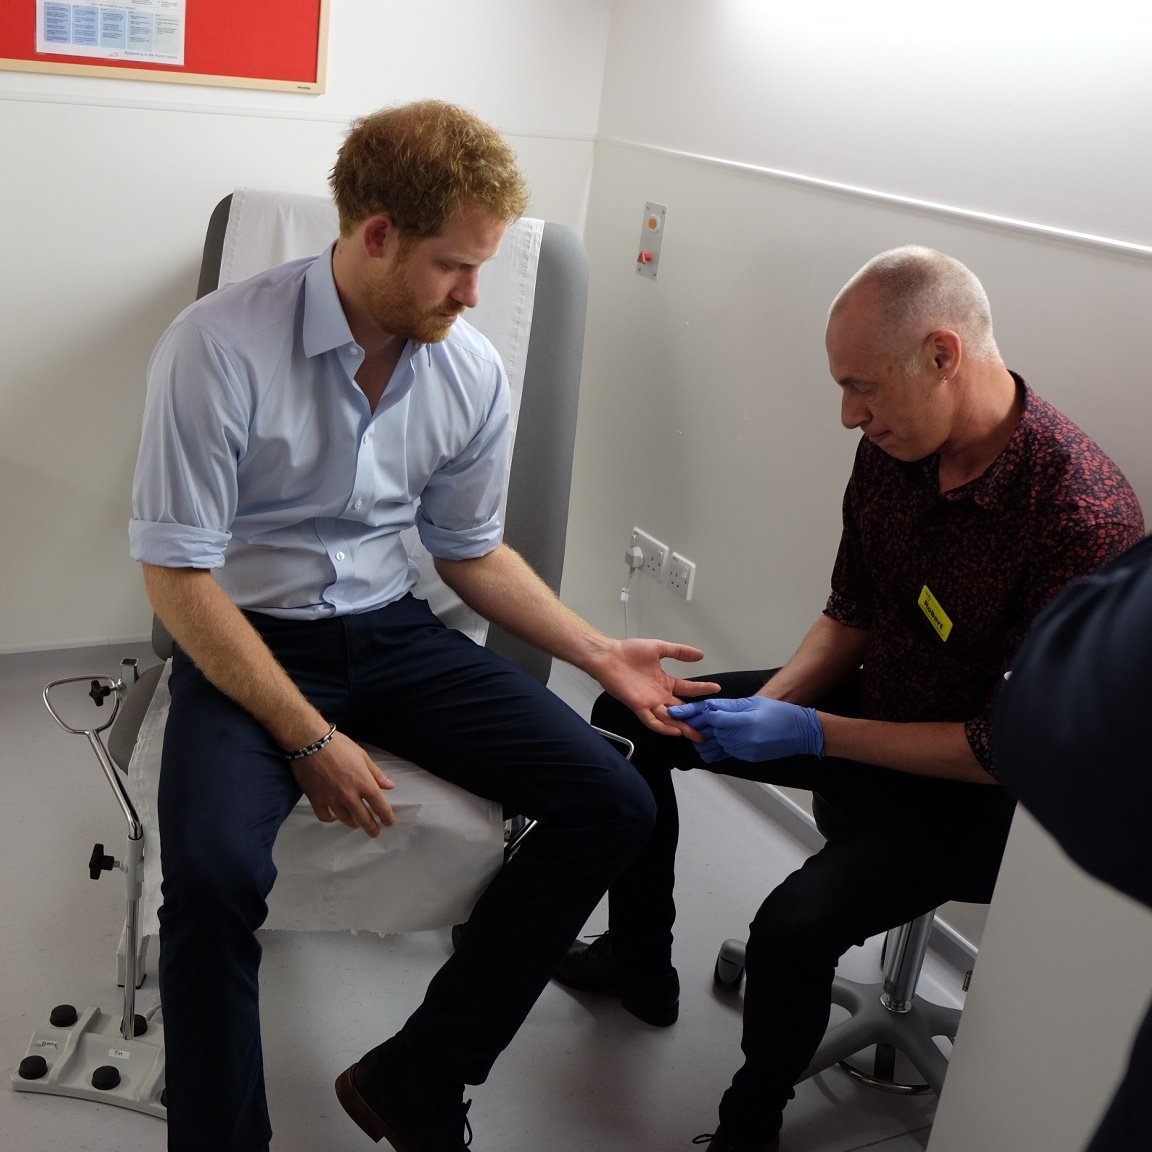 Prince Harry HIV test on facebook live to raise awareness